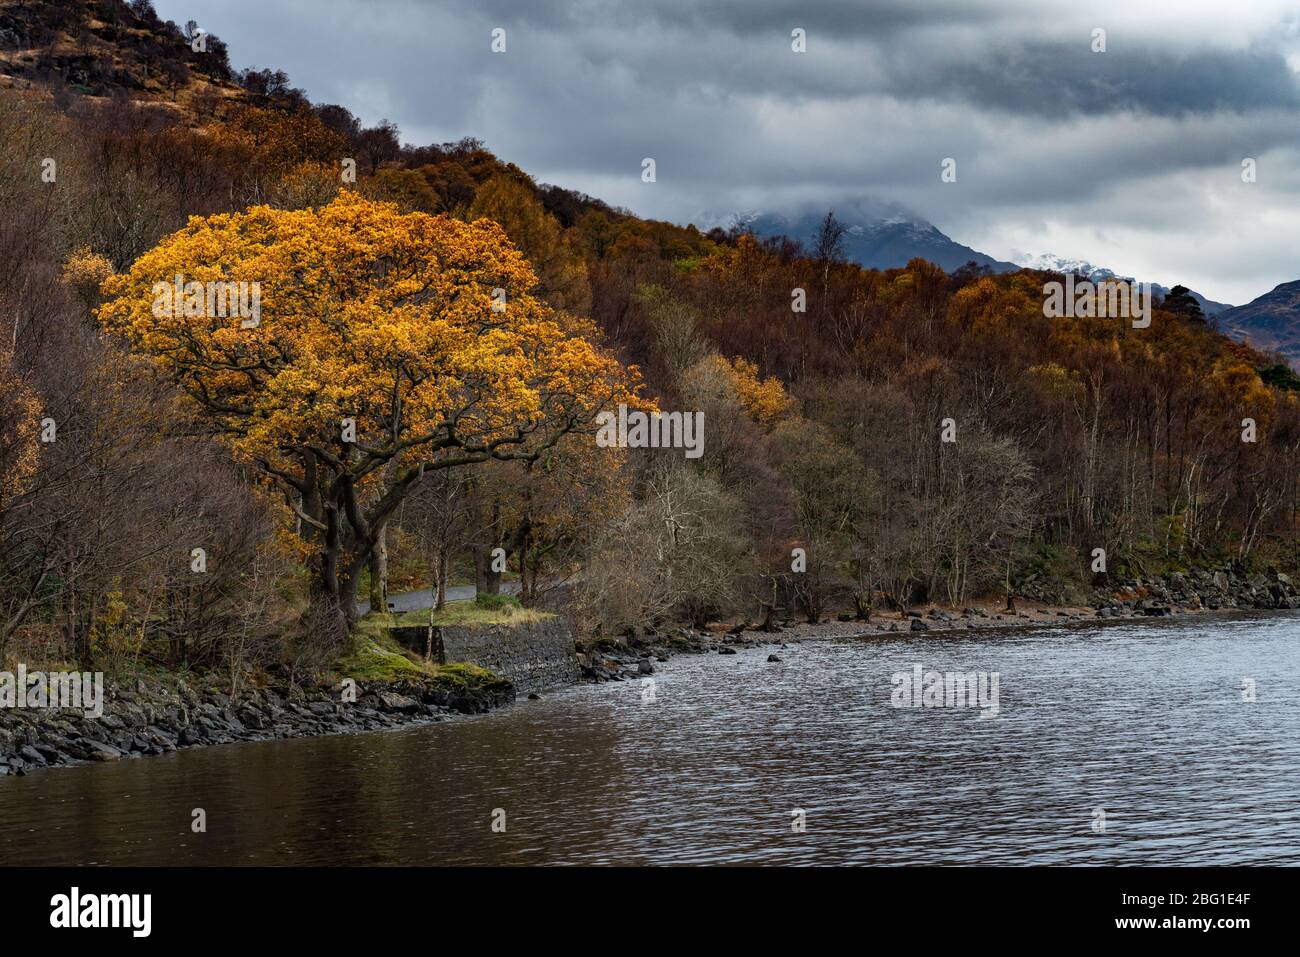 Atmospheric Autumn view, Loch Lomond, Scotland UK with colourful foreground tree and snowy mountains in the background Stock Photo